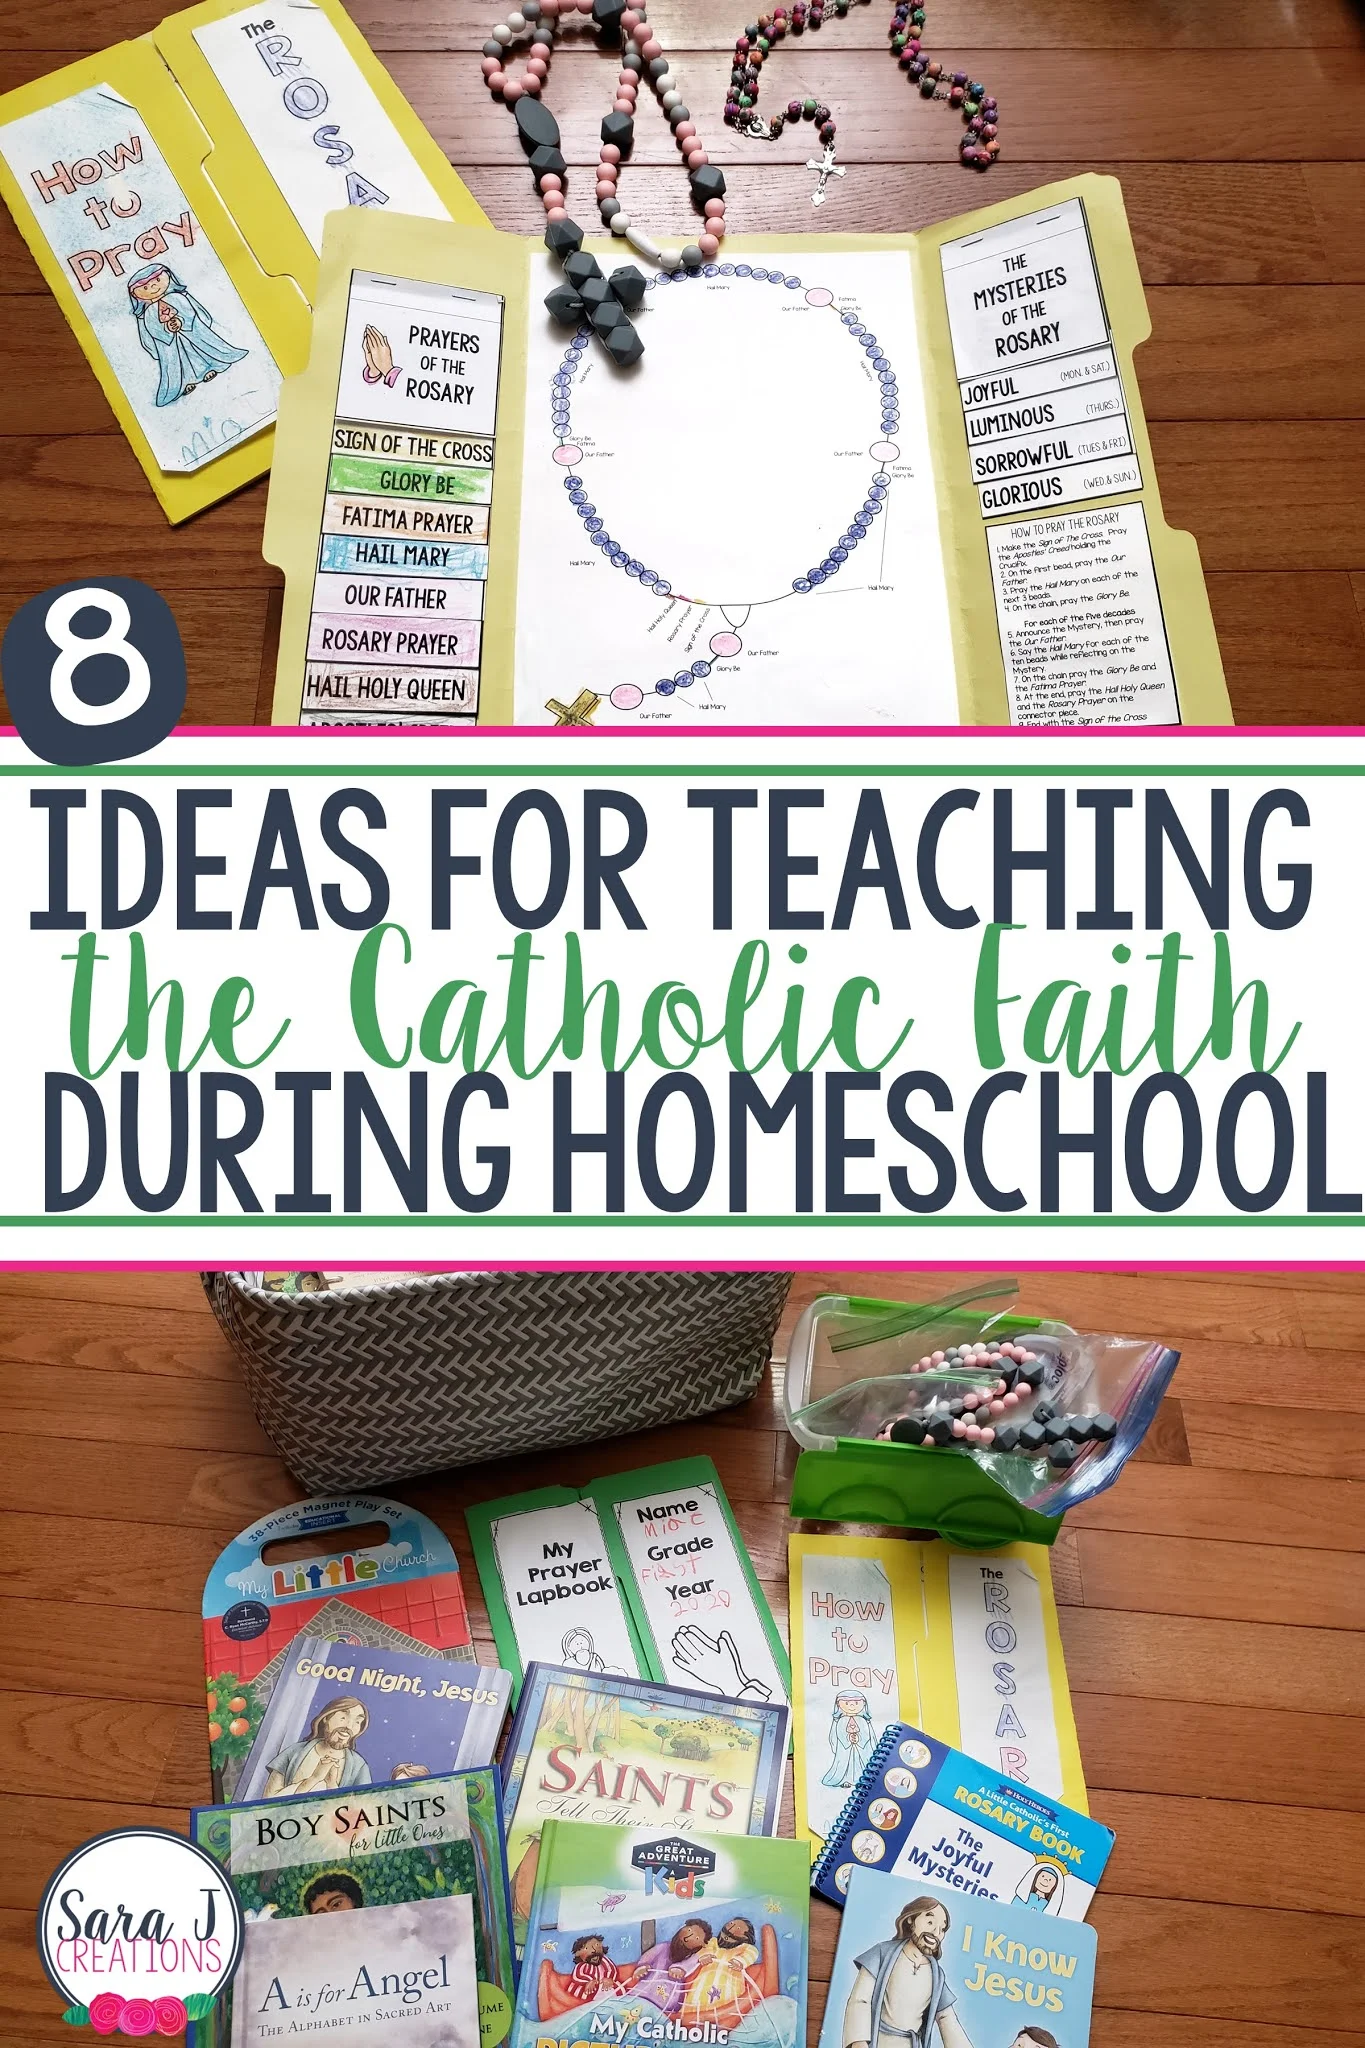 Simple ways to incorporate the Catholic faith into your homeschool day. These ideas could be added to your day even if you aren't homeschooling.